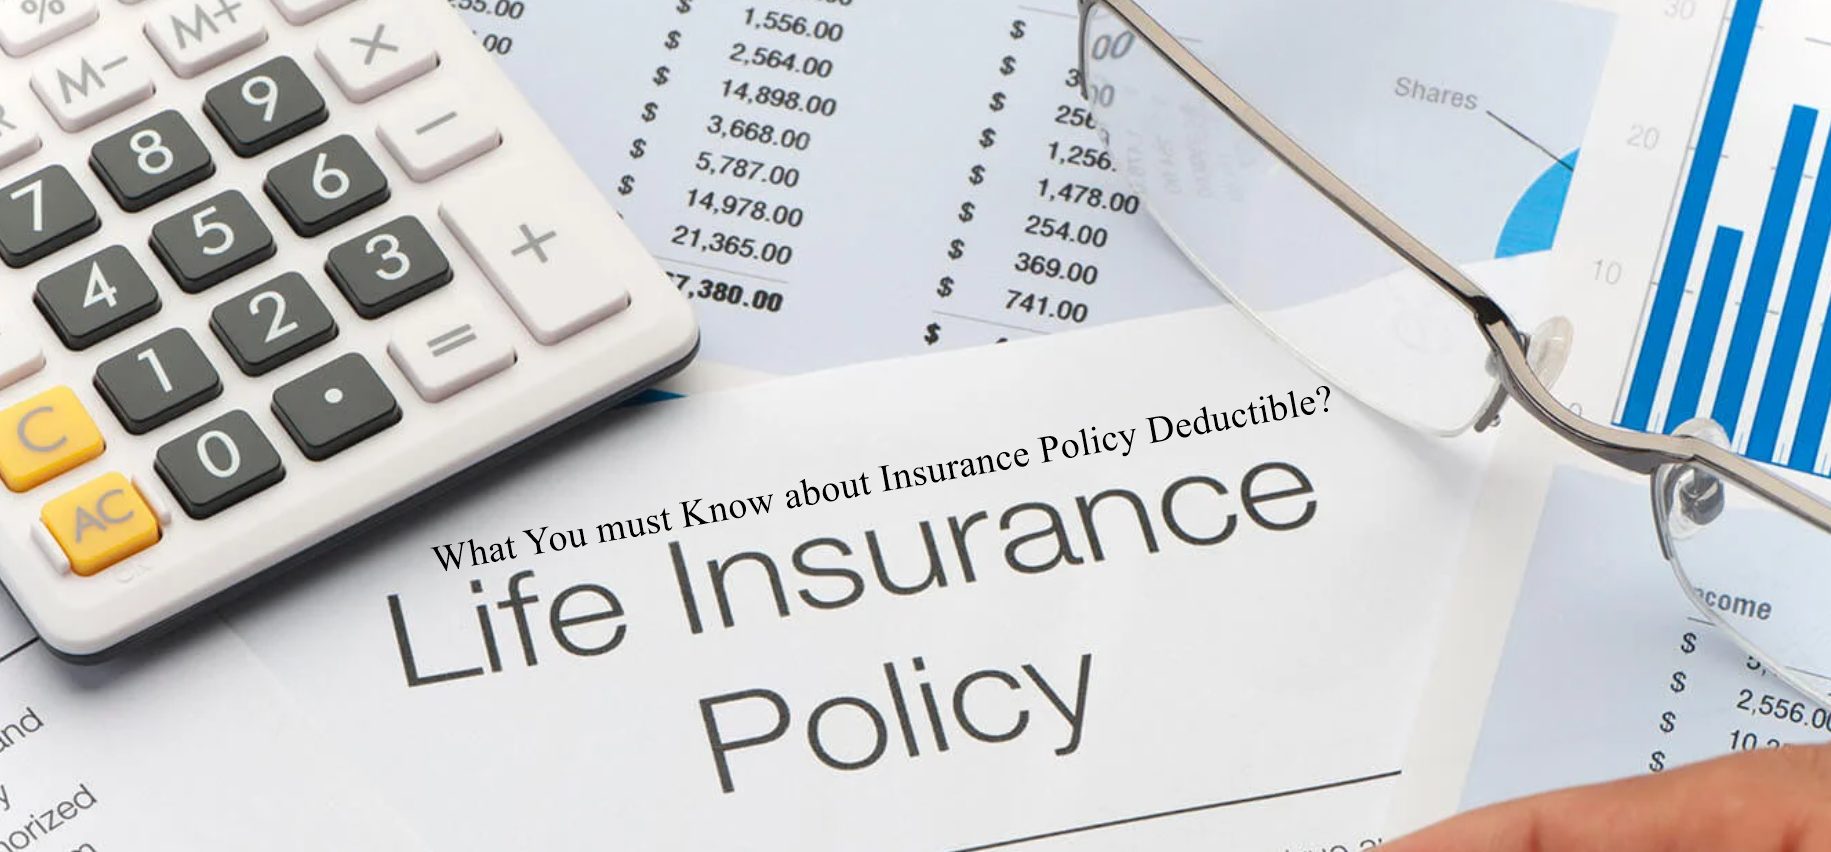 What You must Know about Insurance Policy Deductible?